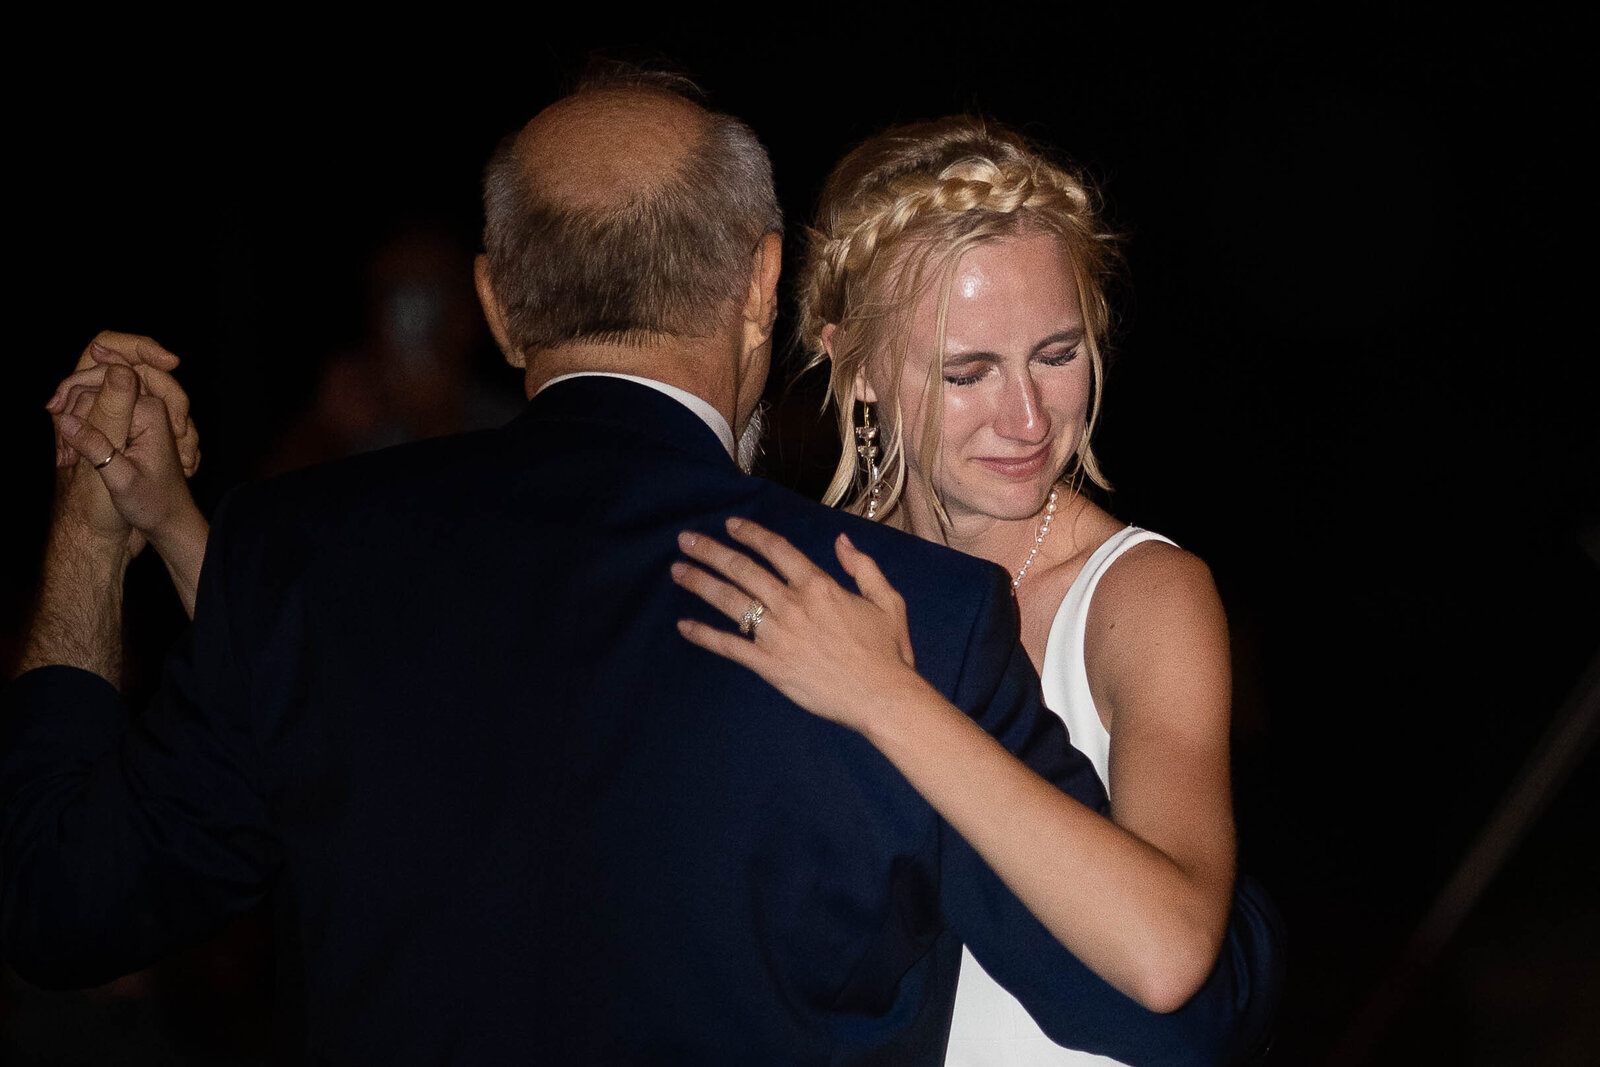 bride and her father dancing as bride hugs her father and leans on his shoulder as a tear strolls down her cheek at the wedding reception by nashville wedding photographer klem photography